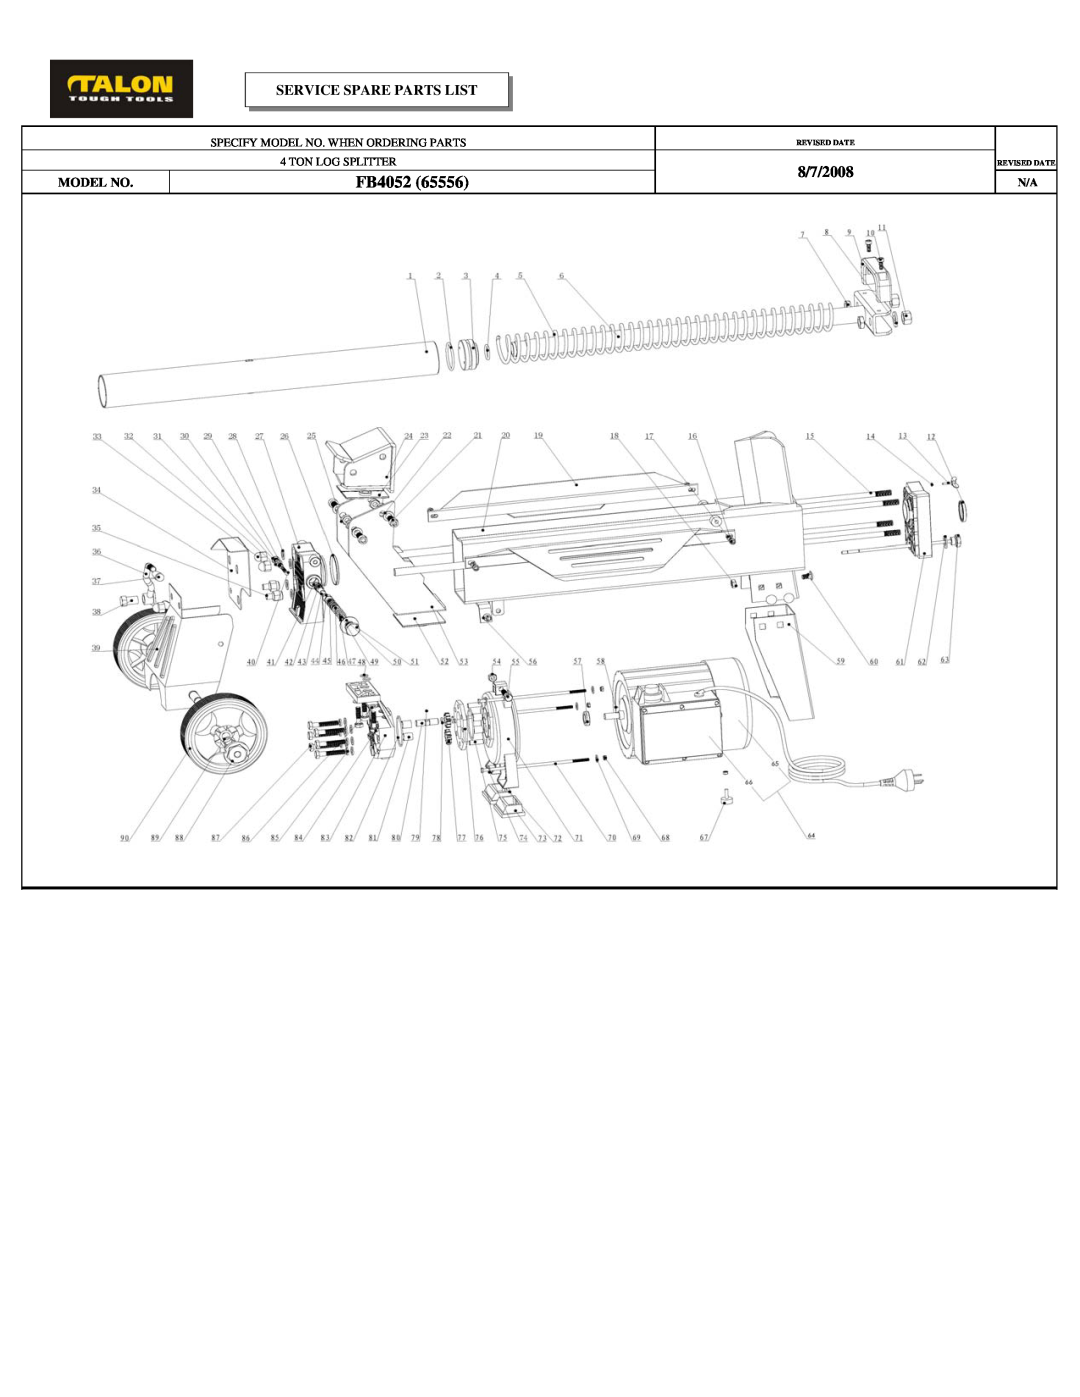 McCulloch FB4052 Service Spare Parts List, Specify Model No. When Ordering Parts, Ton Log Splitter, Revised Date 